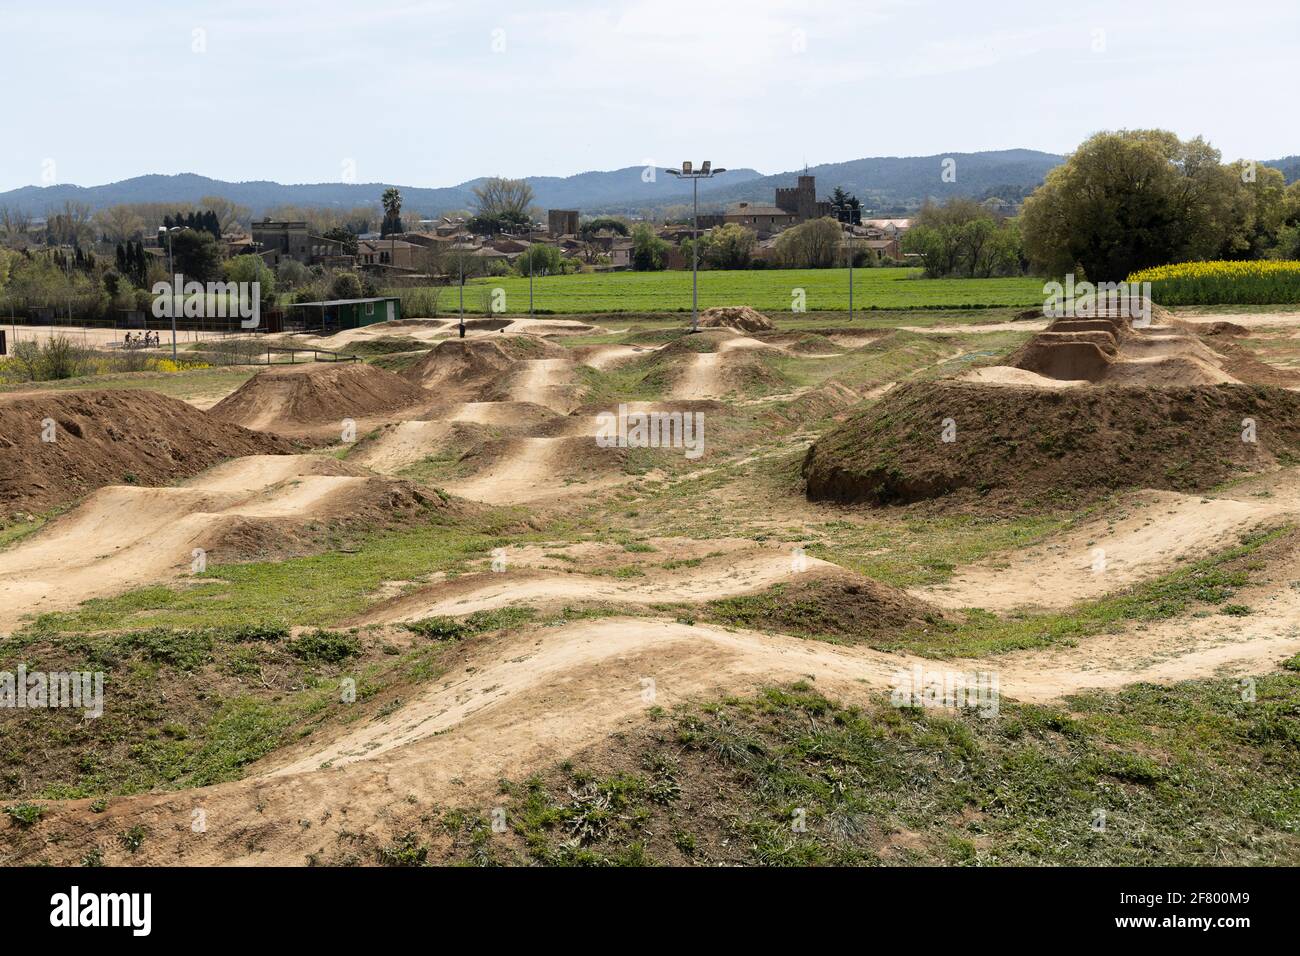 Bike park with dirt jumps in Forallac, Catalonia, Spain Stock Photo